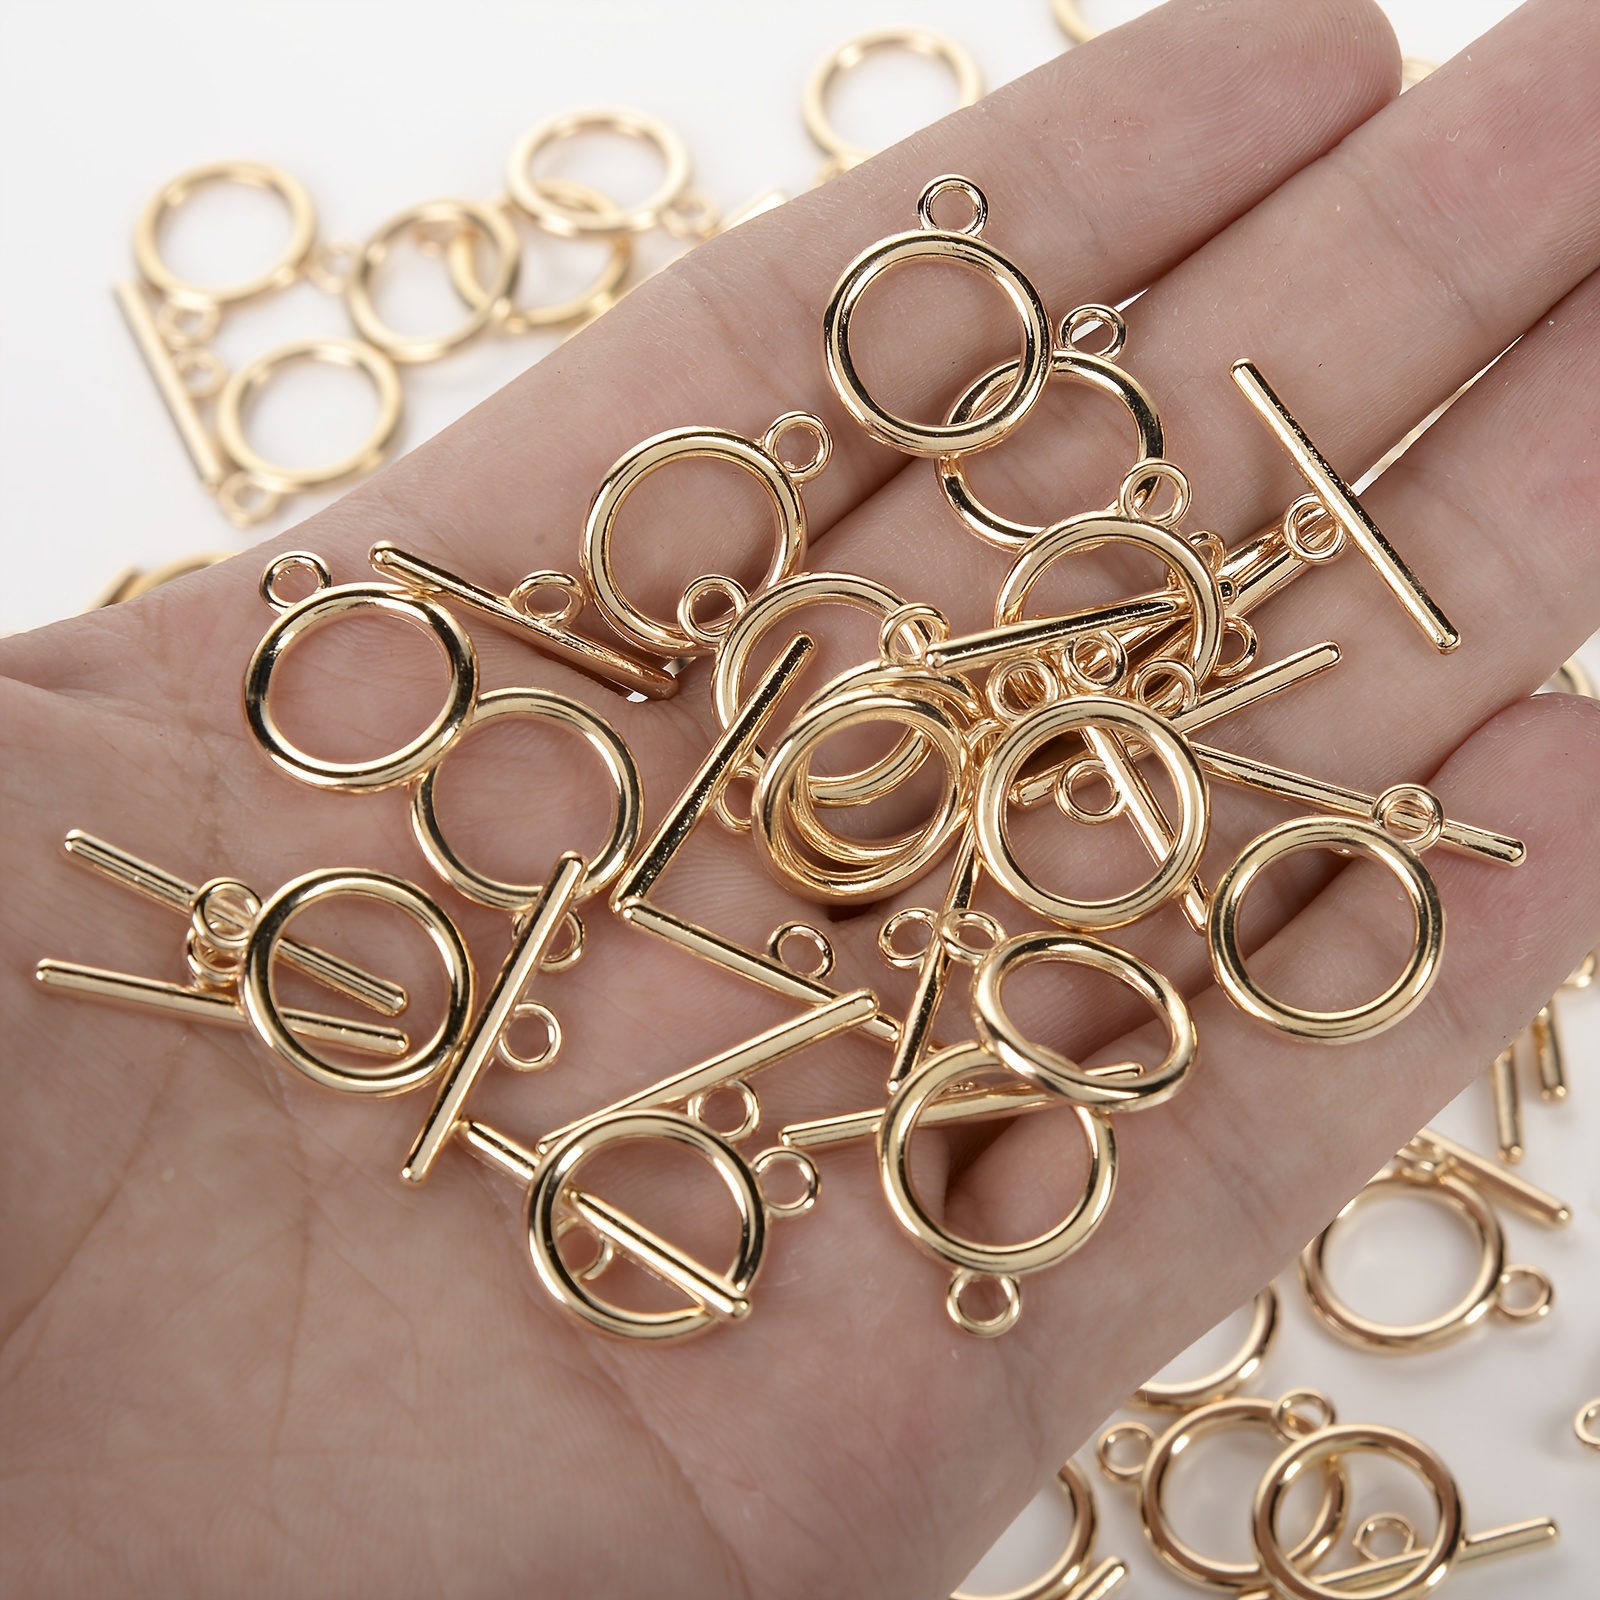 Copper Toggle Jewelry Clasps Necklace Toggle Clasp Silver Toggle Clasps for  Jewelry Making Kit Jewelry Clasps Beads for Bracelets Making Necklace